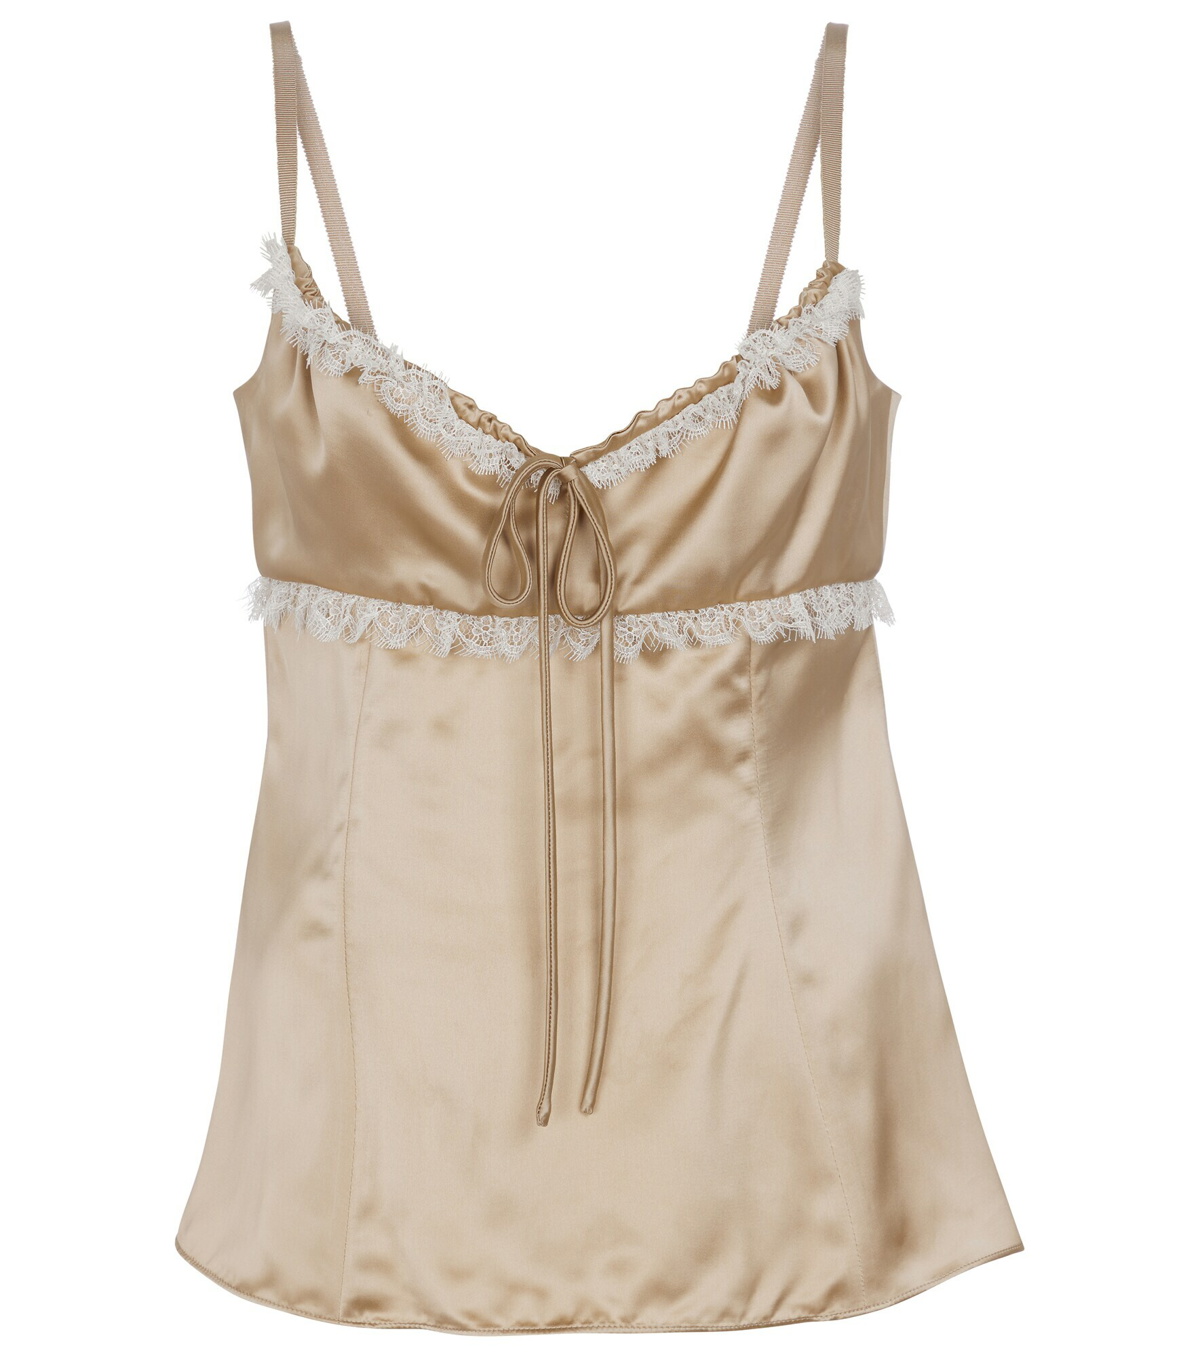 Brock Collection - Siria lace-trimmed satin camisole Brock Collection